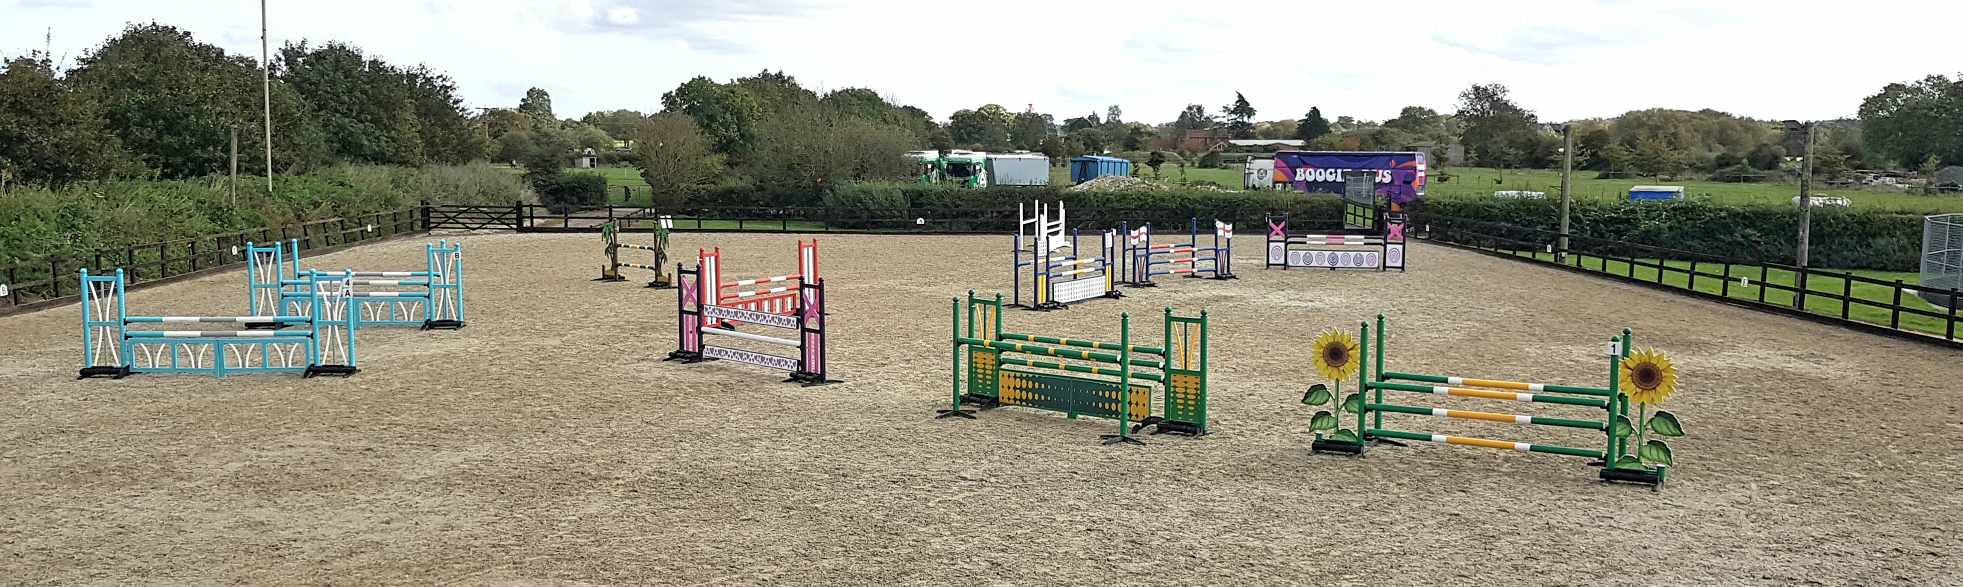 full show jumping course at Parley Equestrian